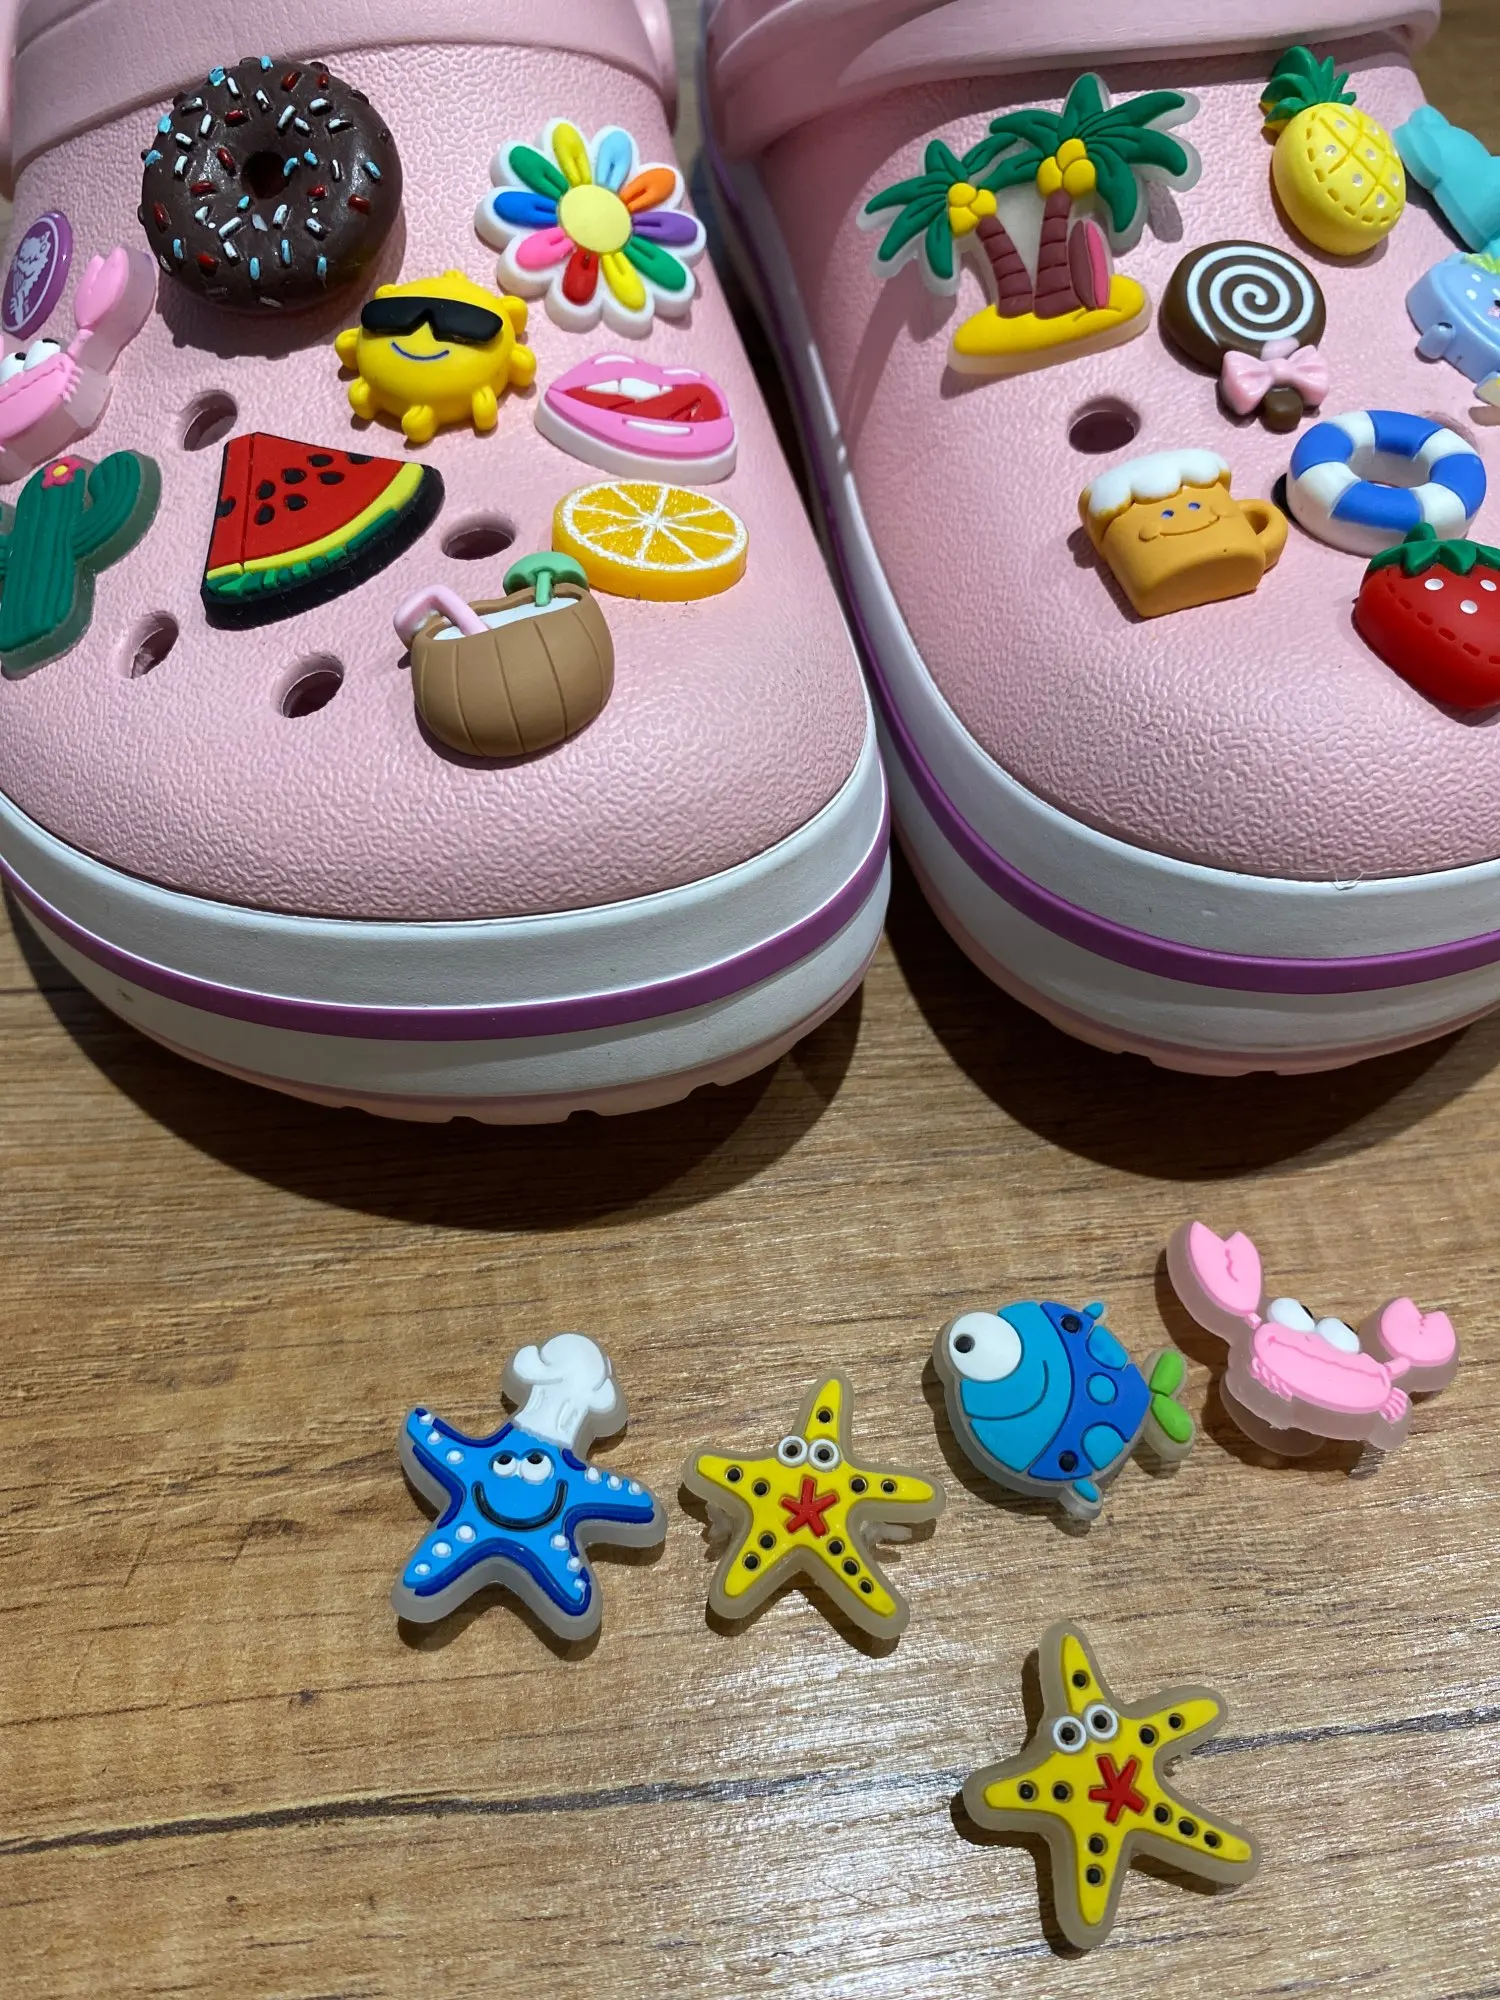 1pcs glowing PVC croc shoes charms animal fish shark starfish Accessories jibz for croc clogs shoe Decorations DIY kids gifts photo review